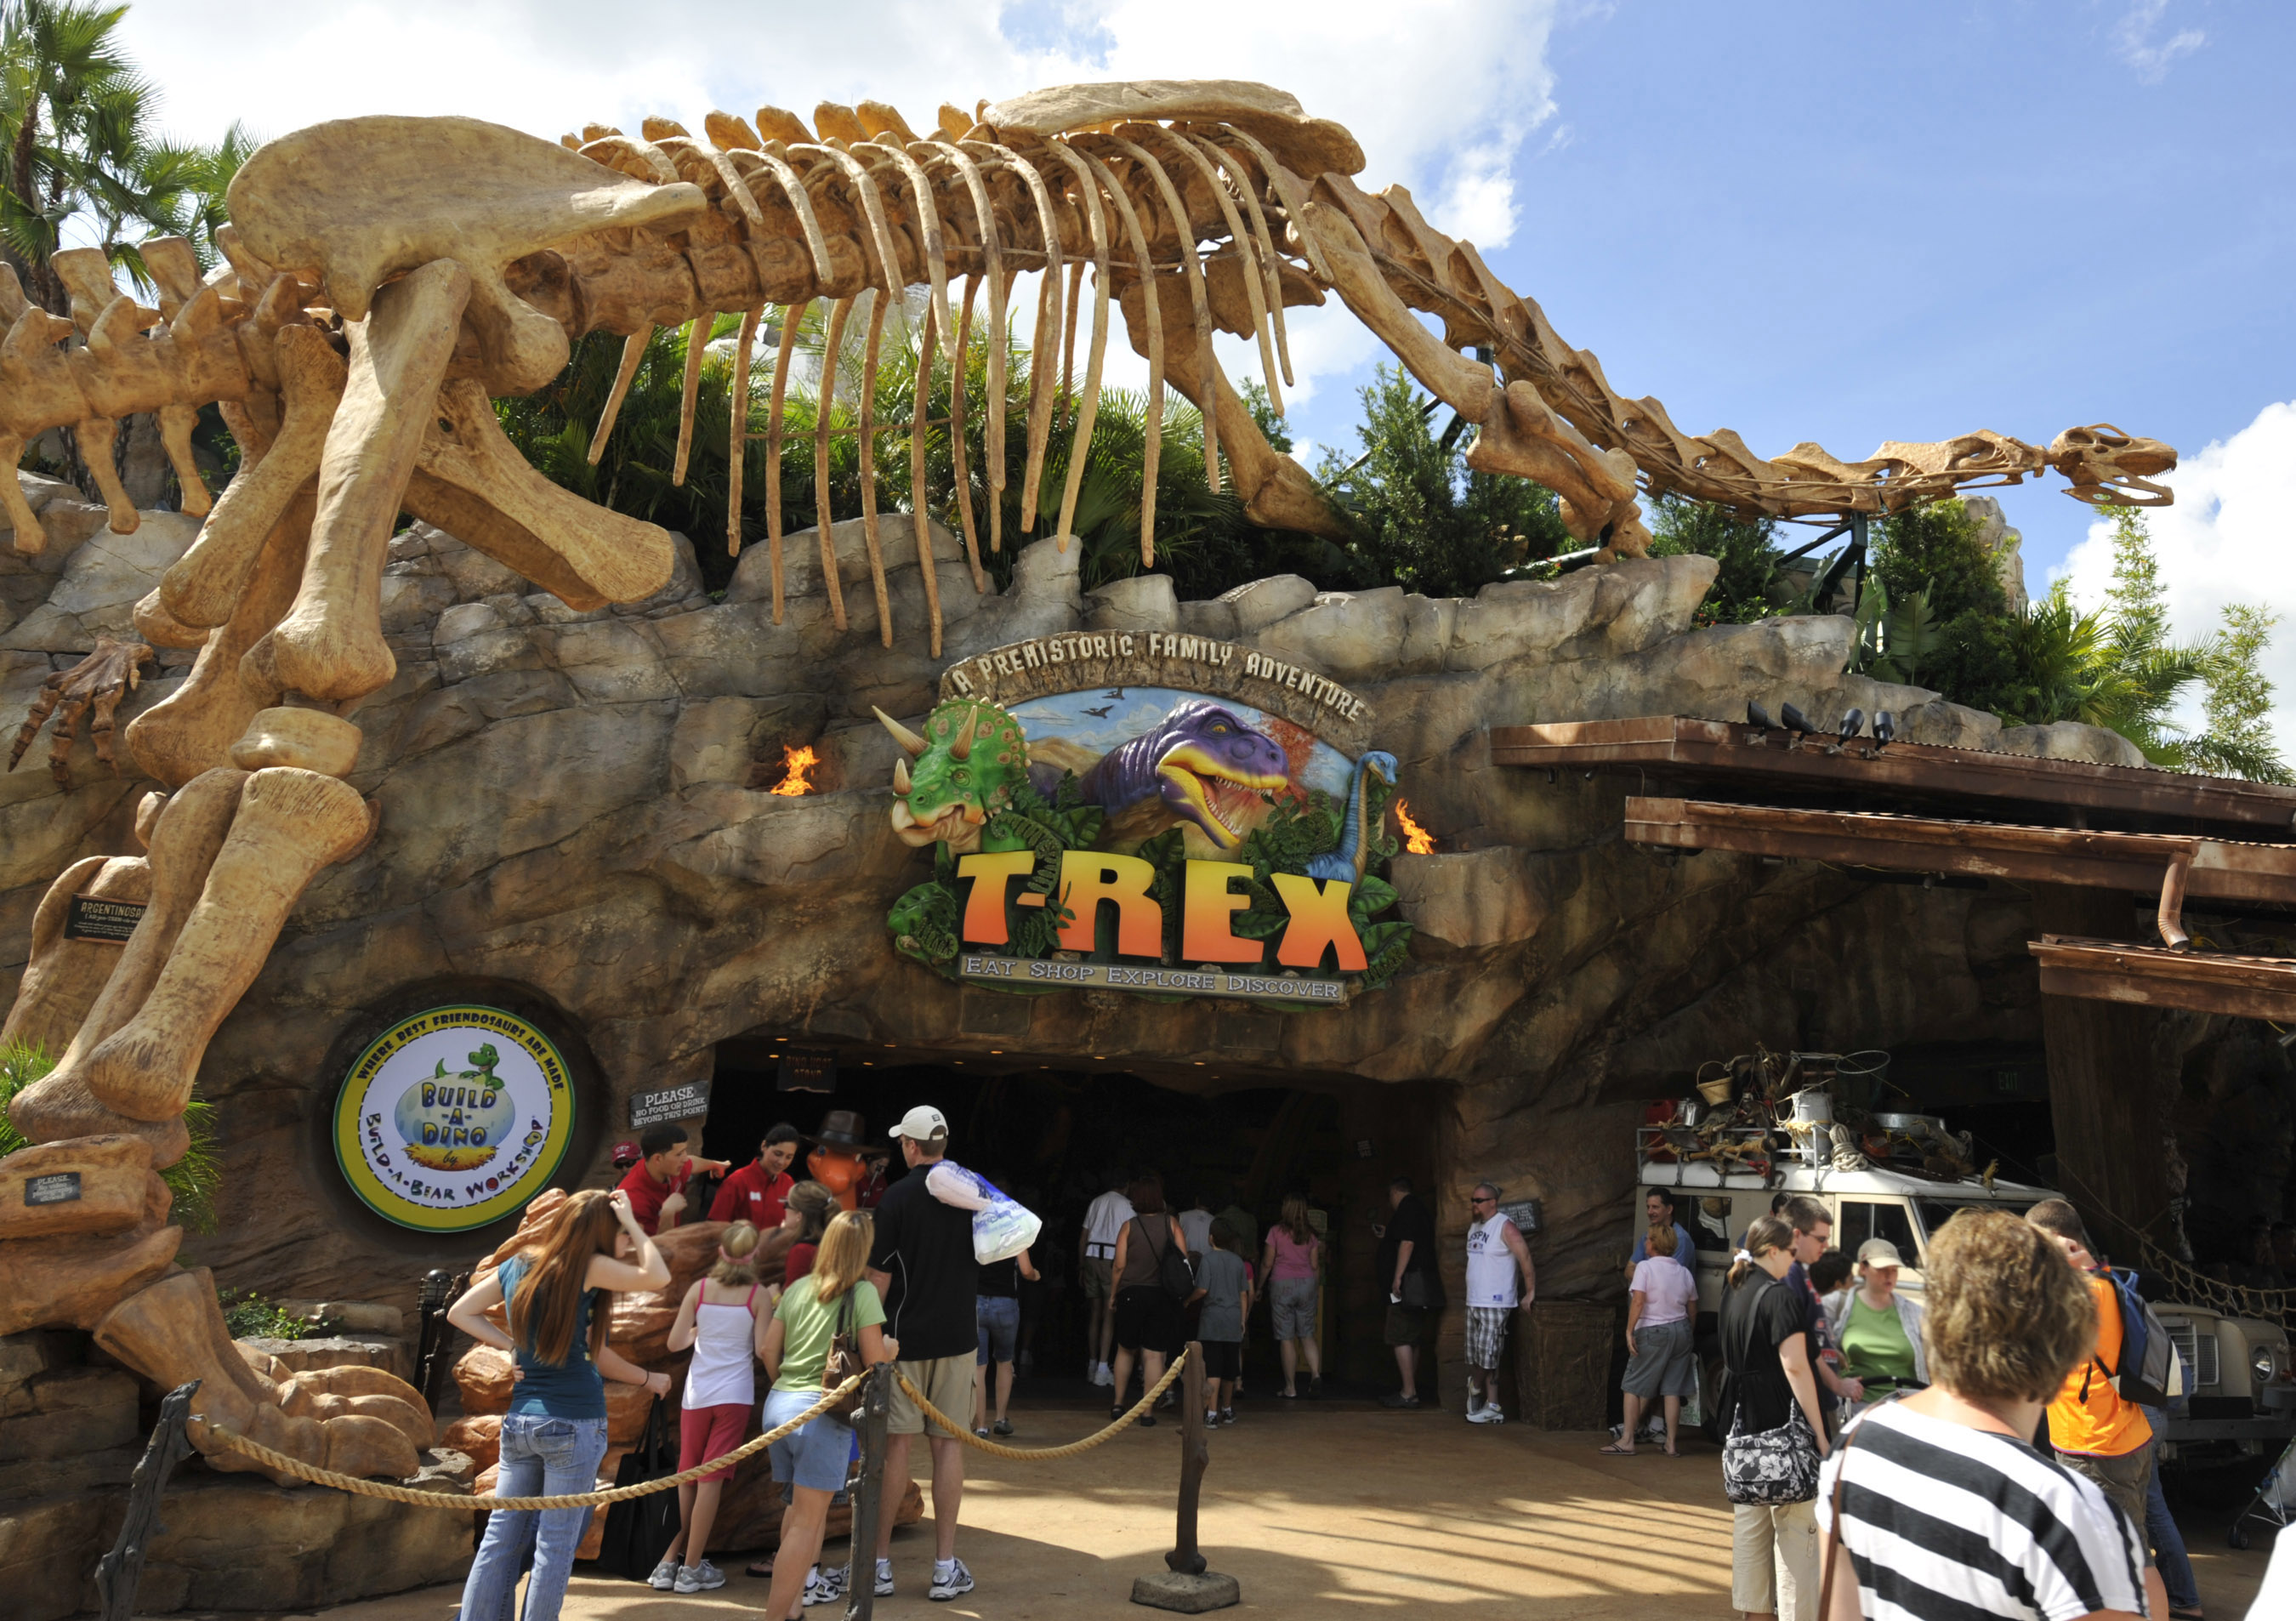 Dine with Santa Claus and More at T-Rex Café in Disney Springs